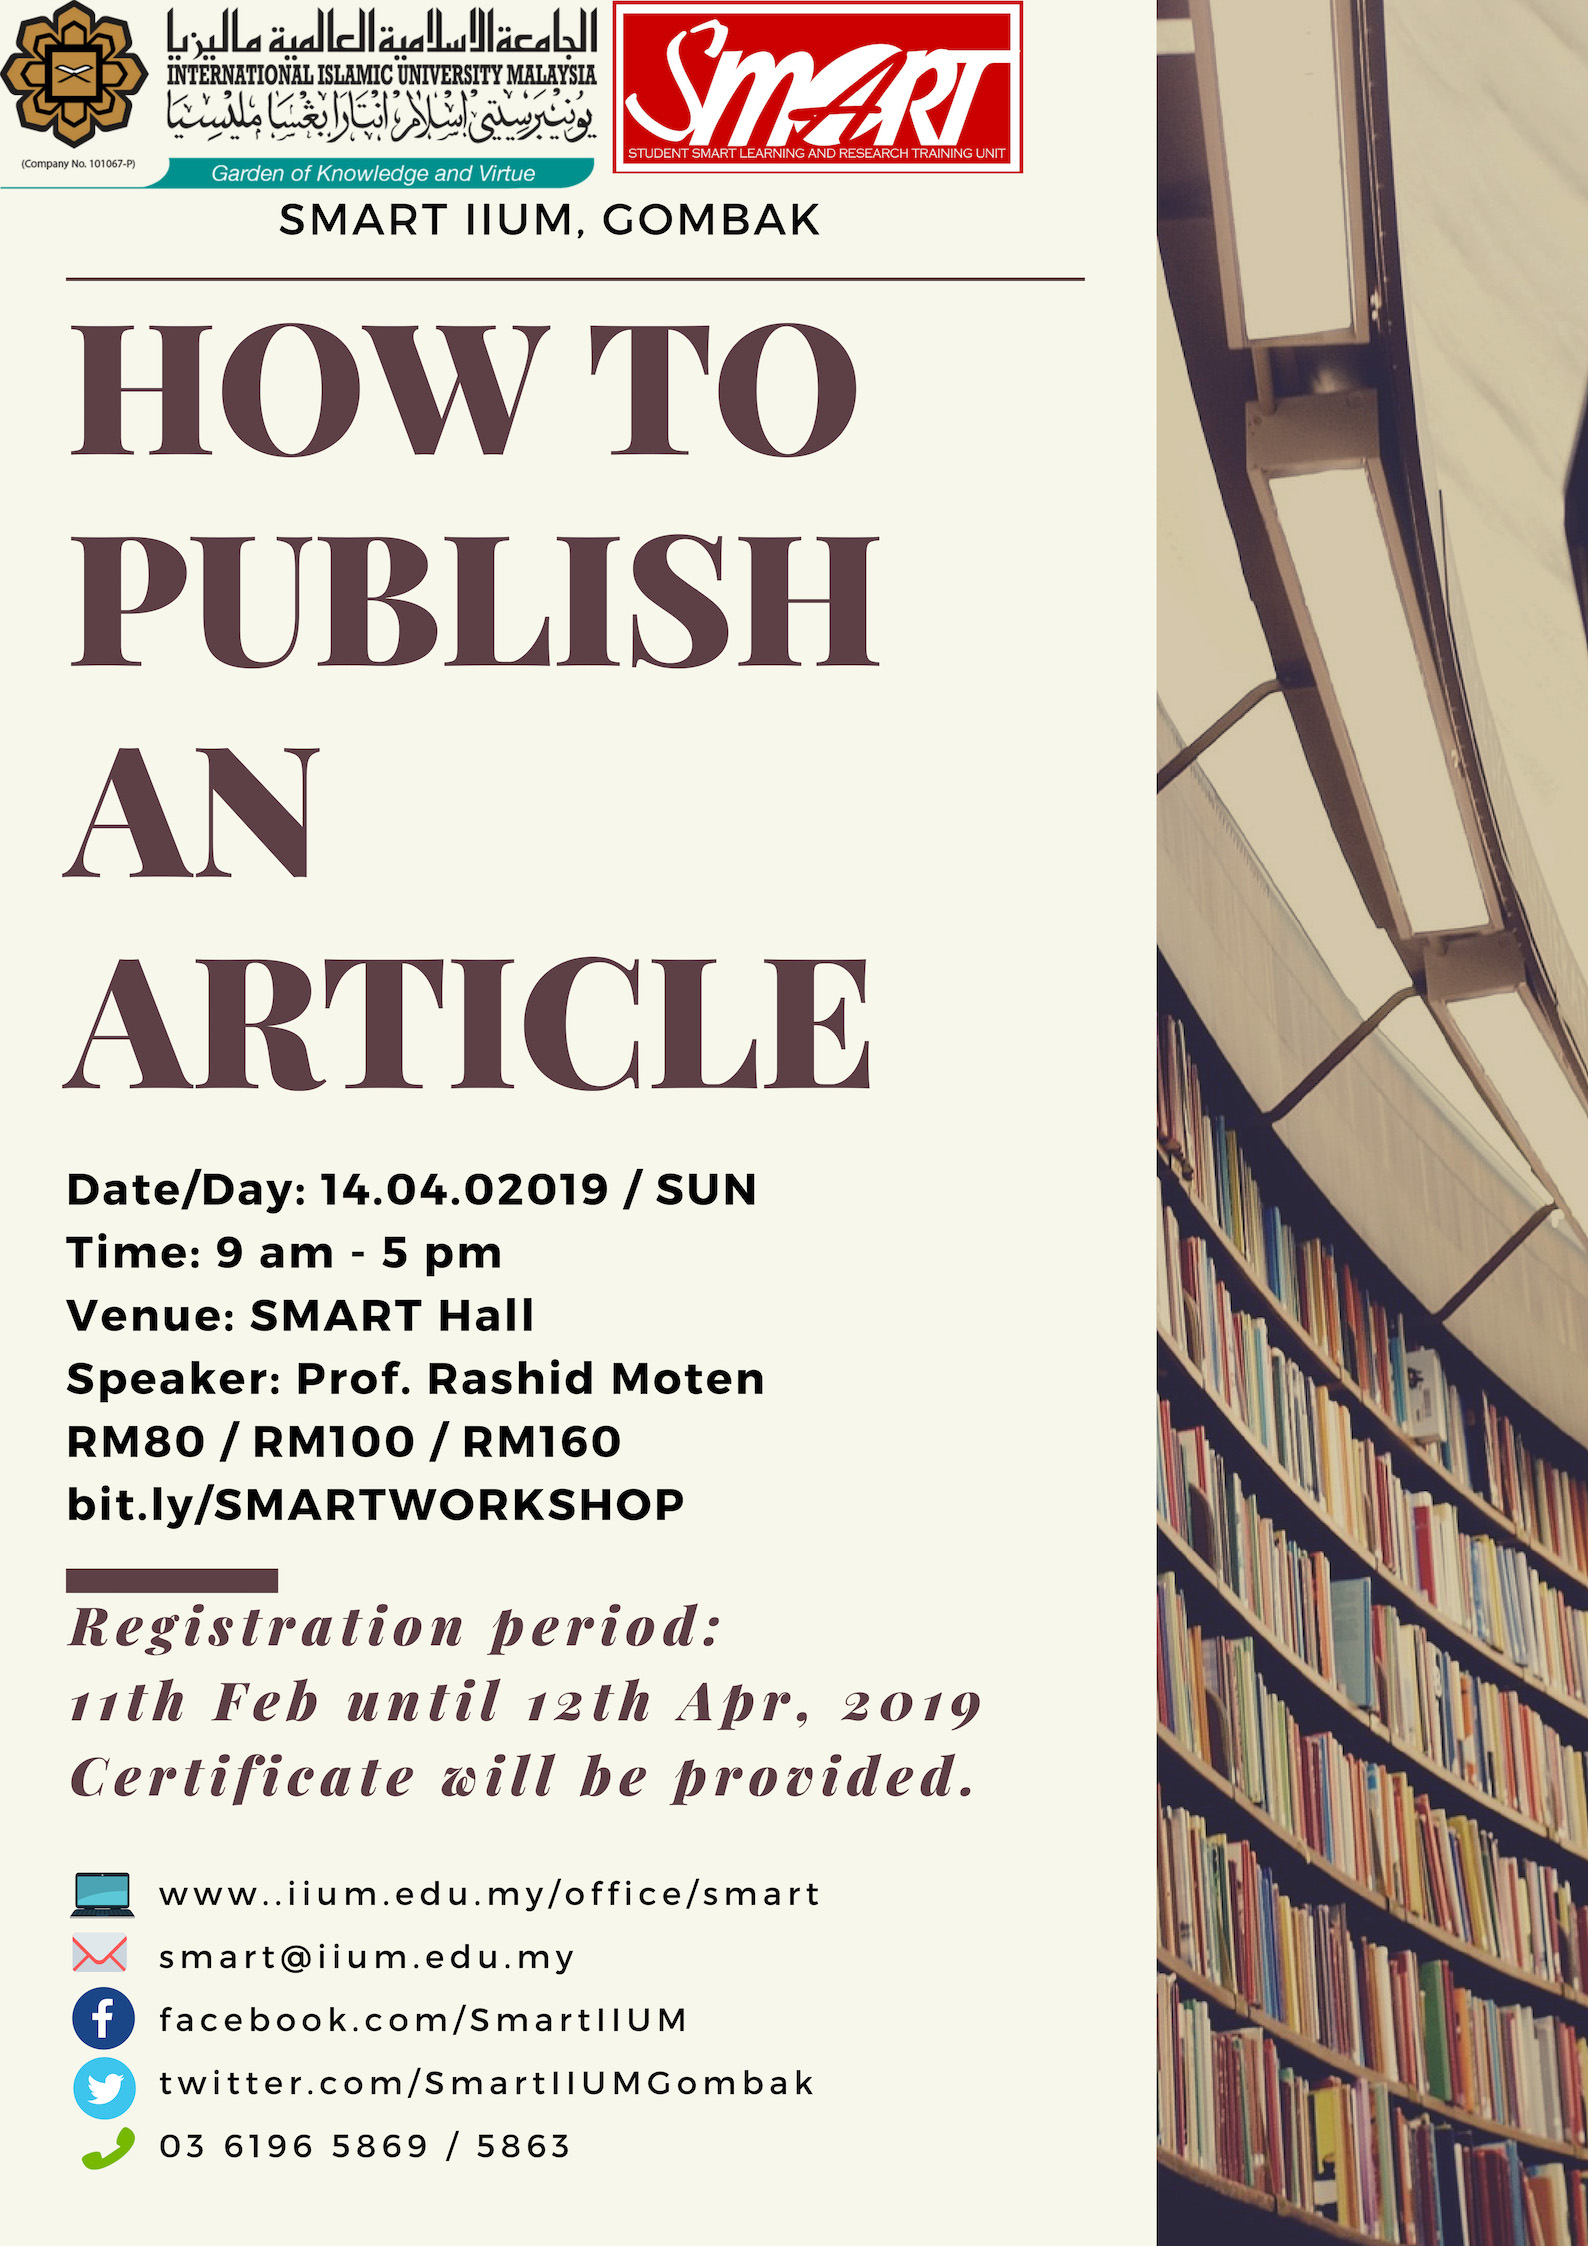 WORKSHOP : HOW TO PUBLISH AN ARTICLE